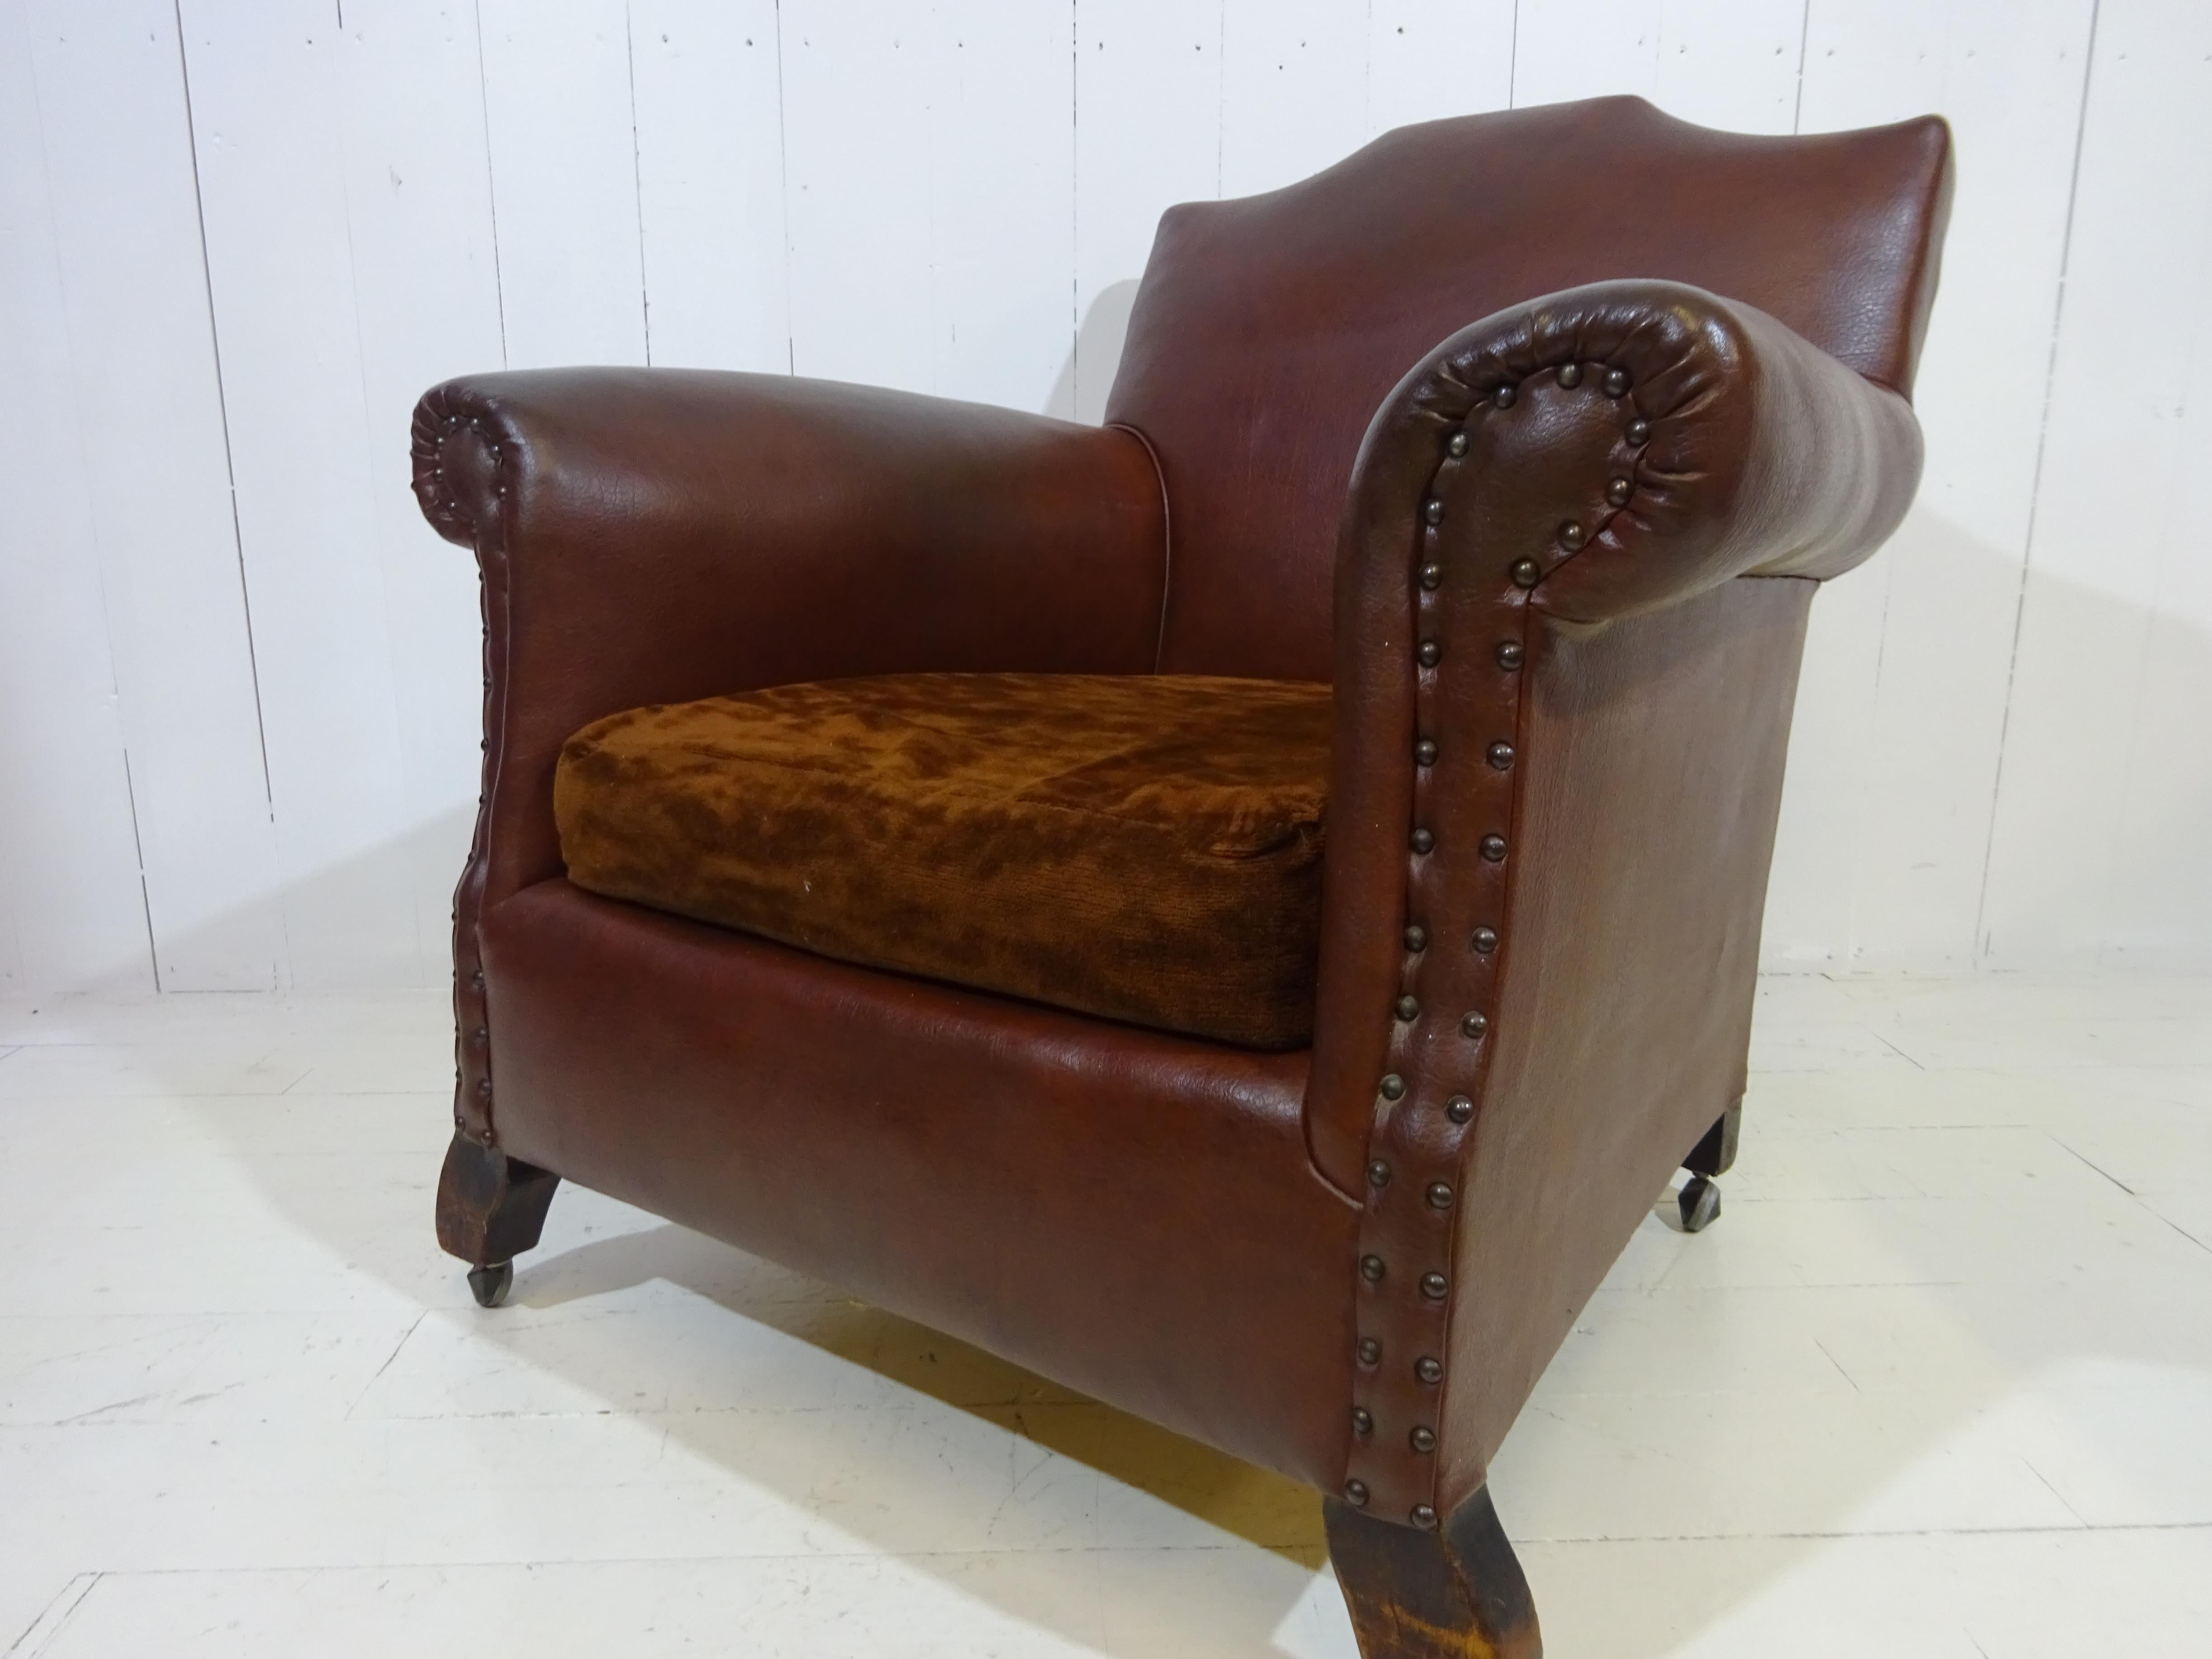 Hand-Crafted Original 1920's Art Deco Club Chair in Brown Faux Leather